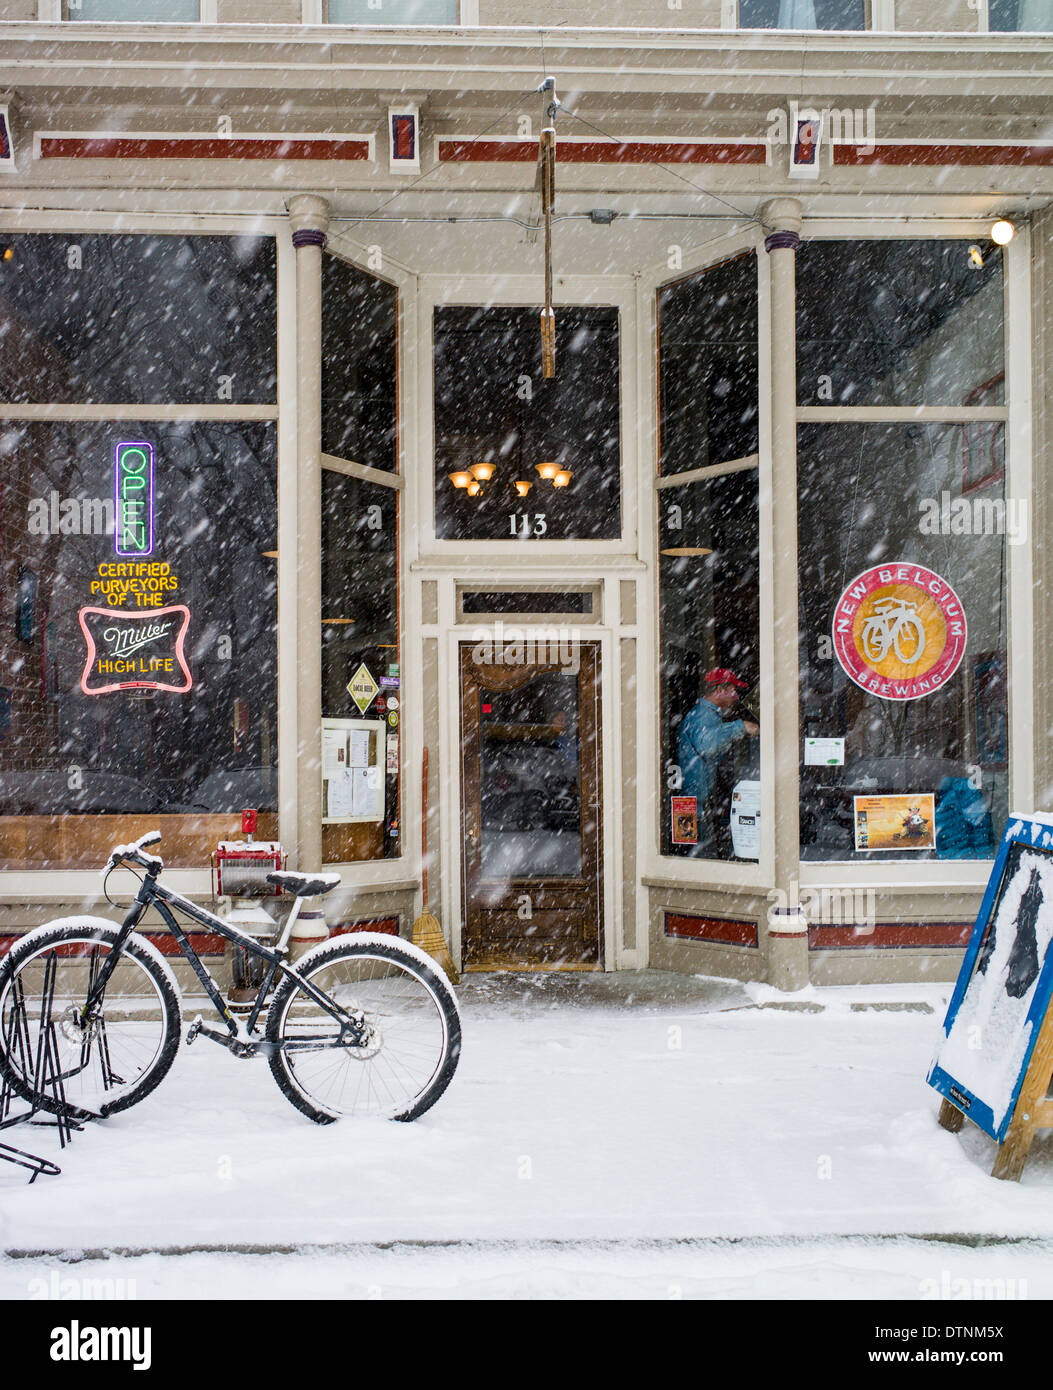 Snowy winter view of bicycle outside a cafe in historic downtown Salida, Colorado, USA Stock Photo